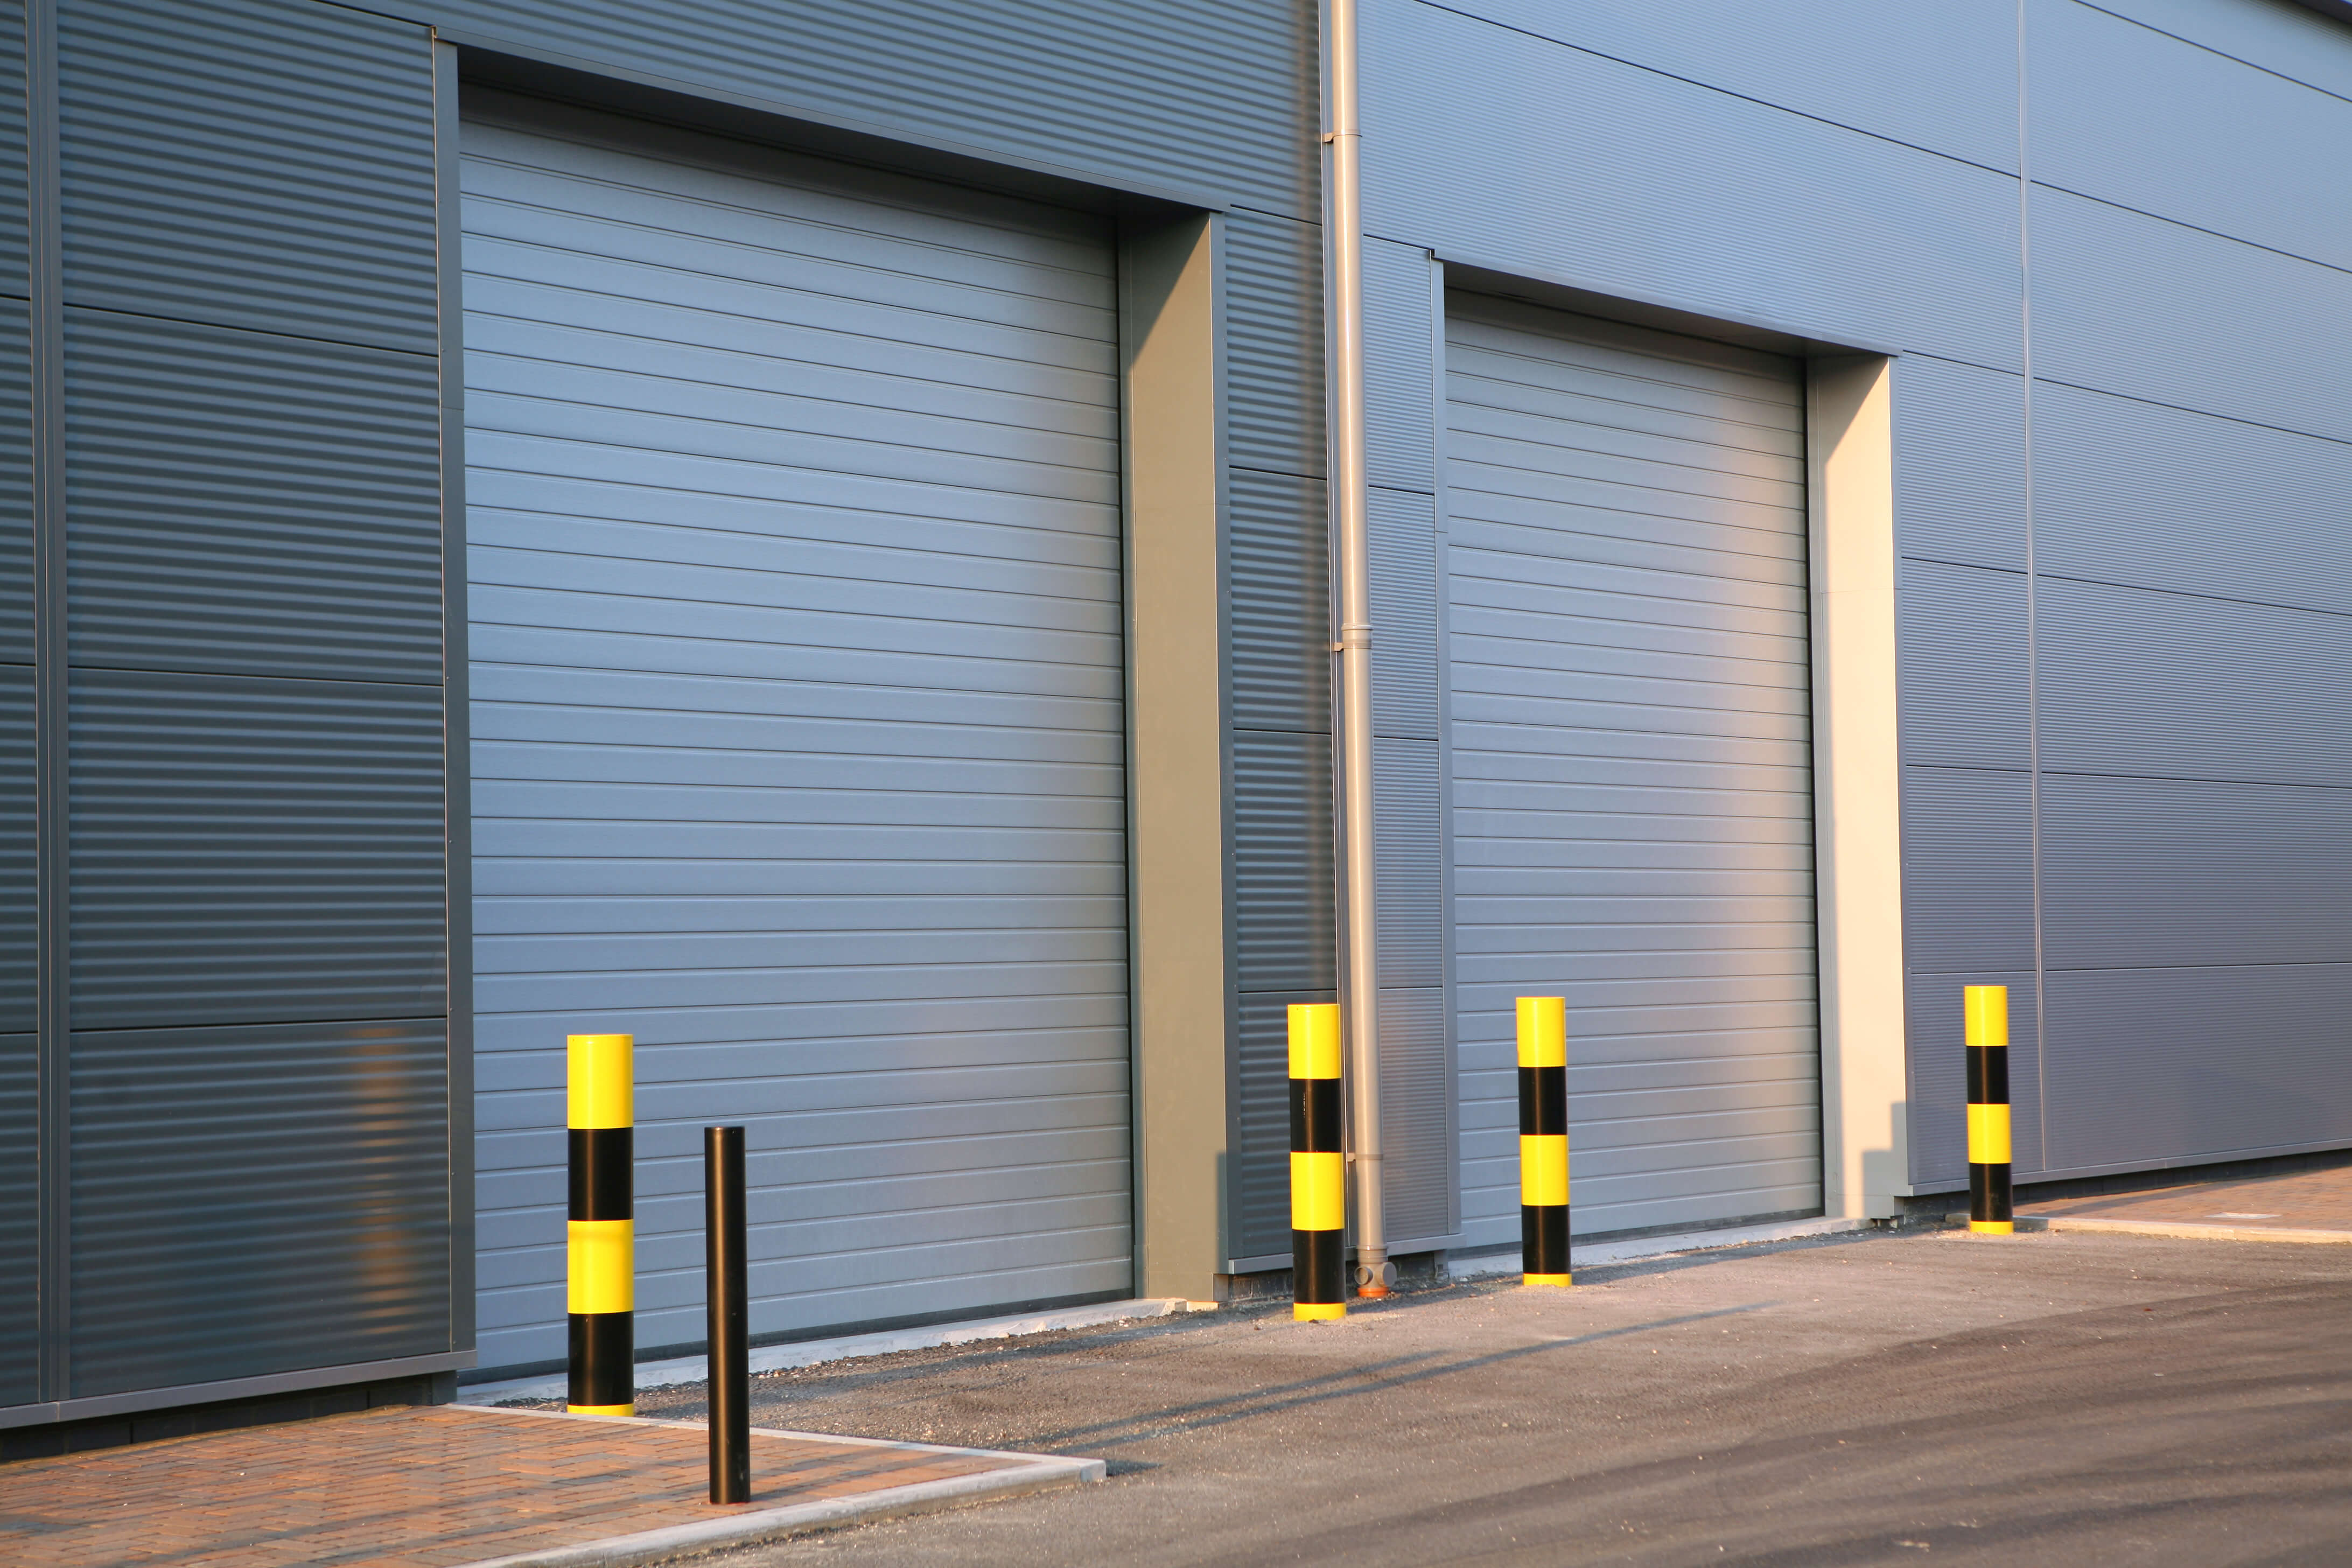 A picture of an industrial unit with garage doors closed